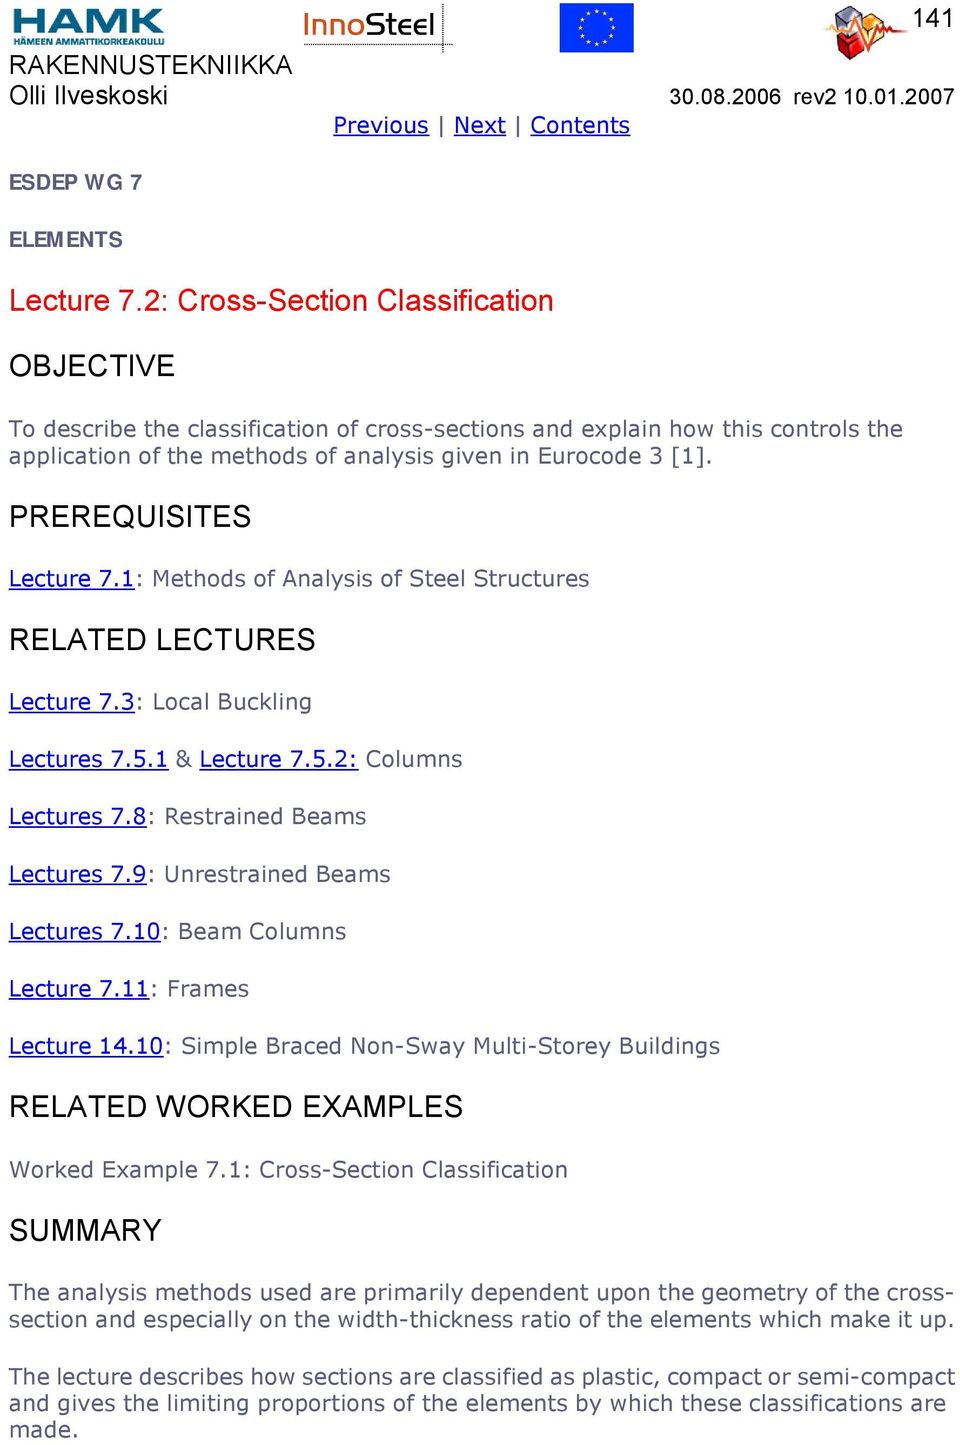 PREREQUISITES Lecture 7.1: Methods of Analysis of Steel Structures RELATED LECTURES Lecture 7.3: Local Buckling Lectures 7.5.1 & Lecture 7.5.: Columns Lectures 7.8: Restrained Beams Lectures 7.